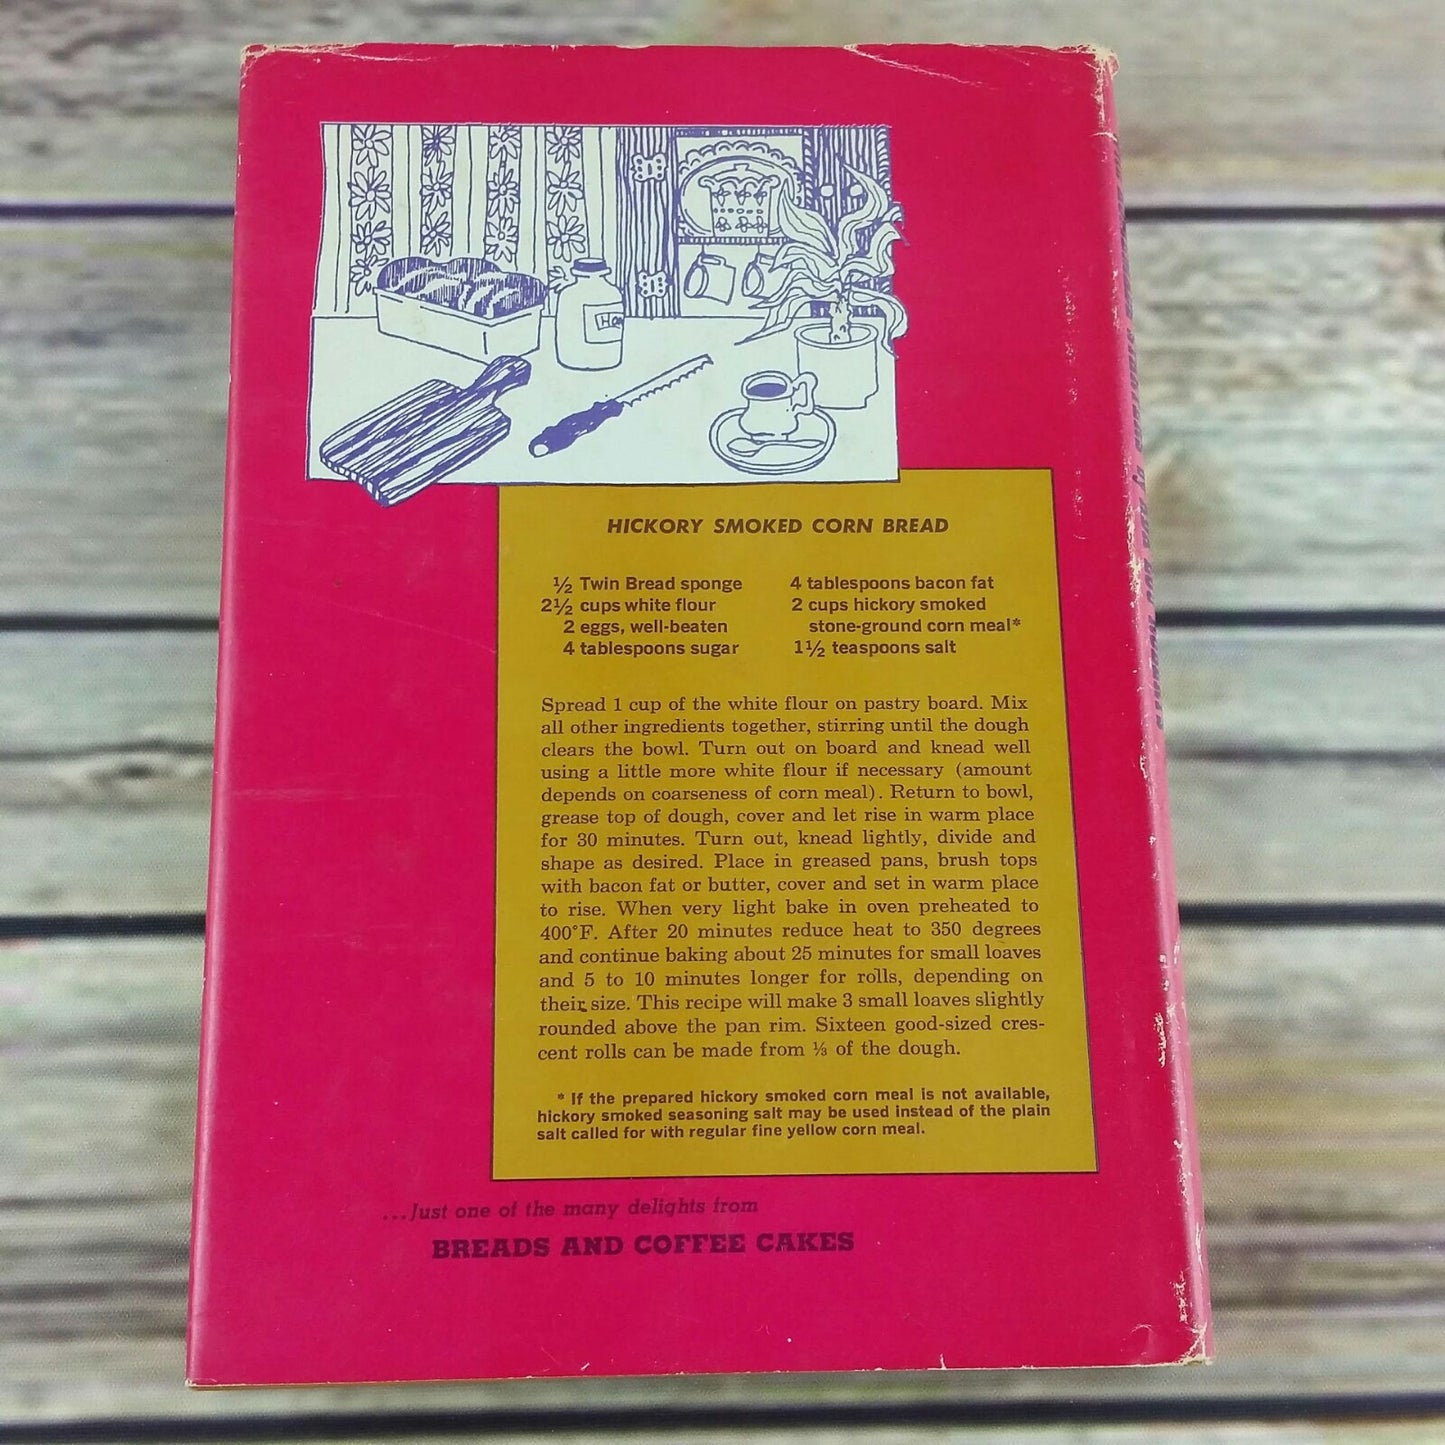 Vintage Cookbook Breads and Coffee Cakes Homemade Starters Recipes 1967 Hardcover - At Grandma's Table